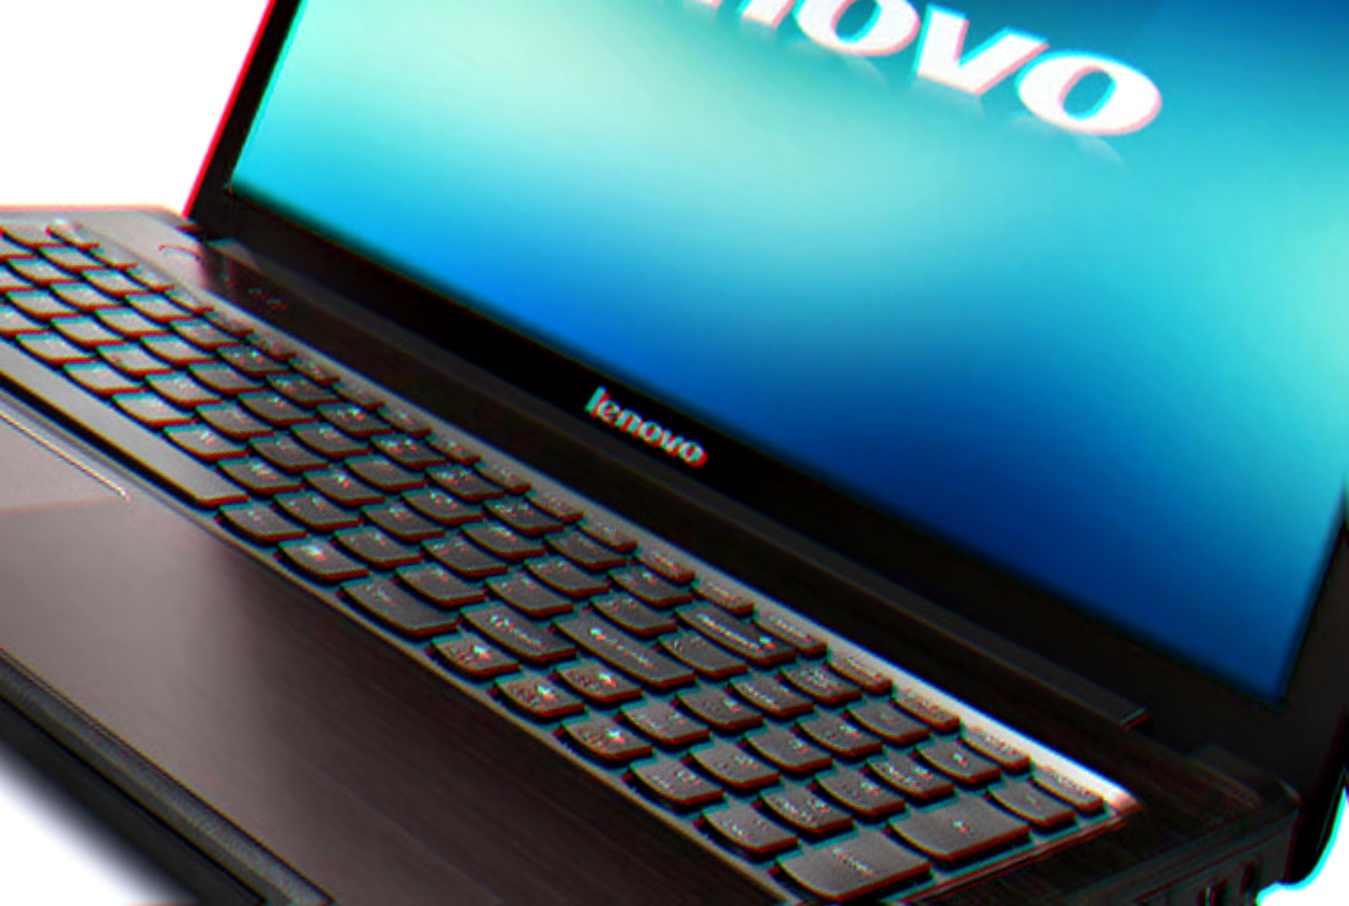 Lenovo to pay $7.3m for secretly installing adware in 750,000 laptops